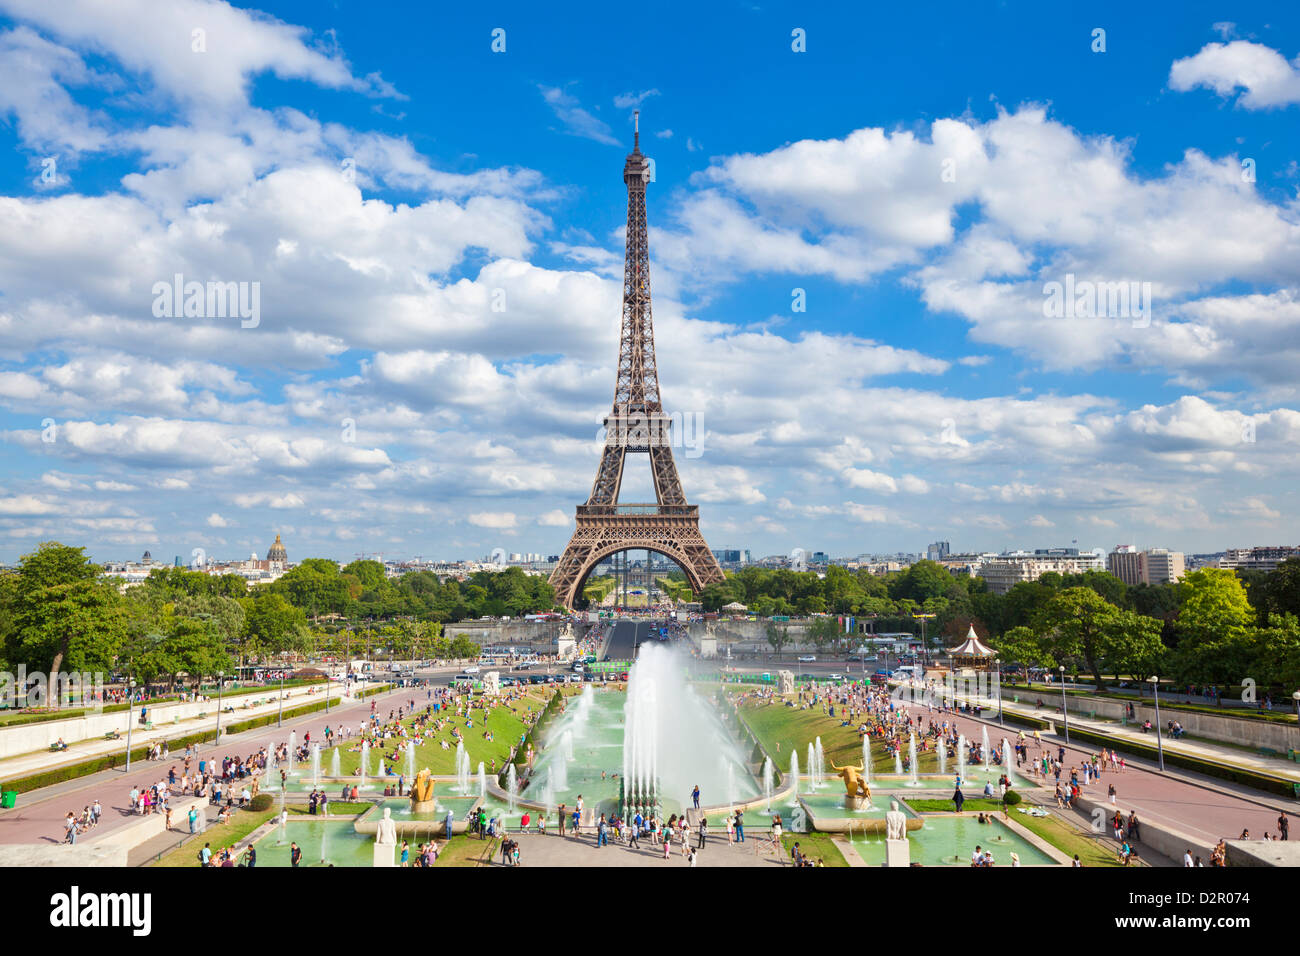 Eiffel Tower and the Trocadero Fountains, Paris, France, Europe Stock Photo